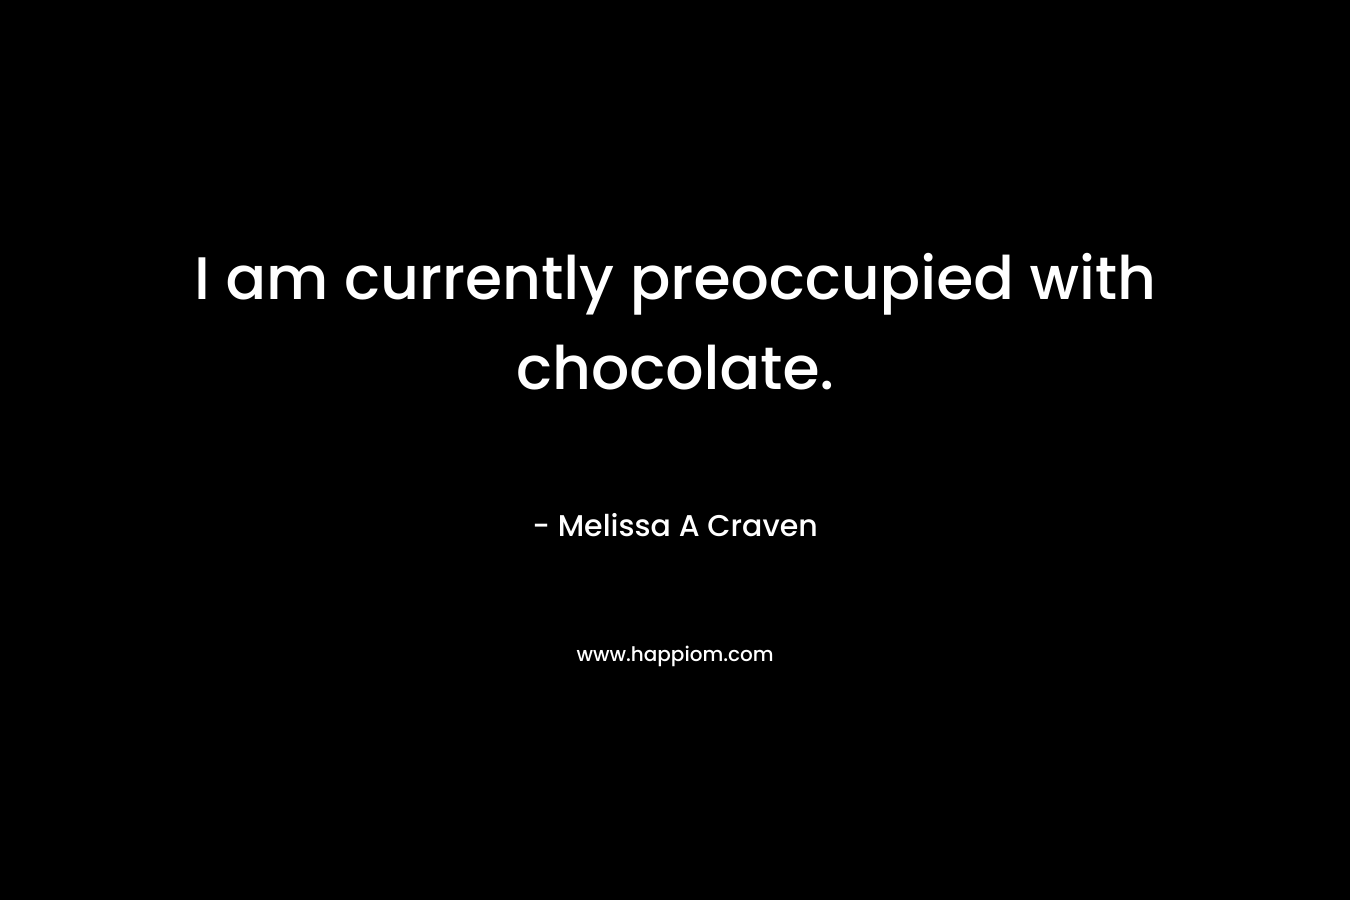 I am currently preoccupied with chocolate. – Melissa A Craven